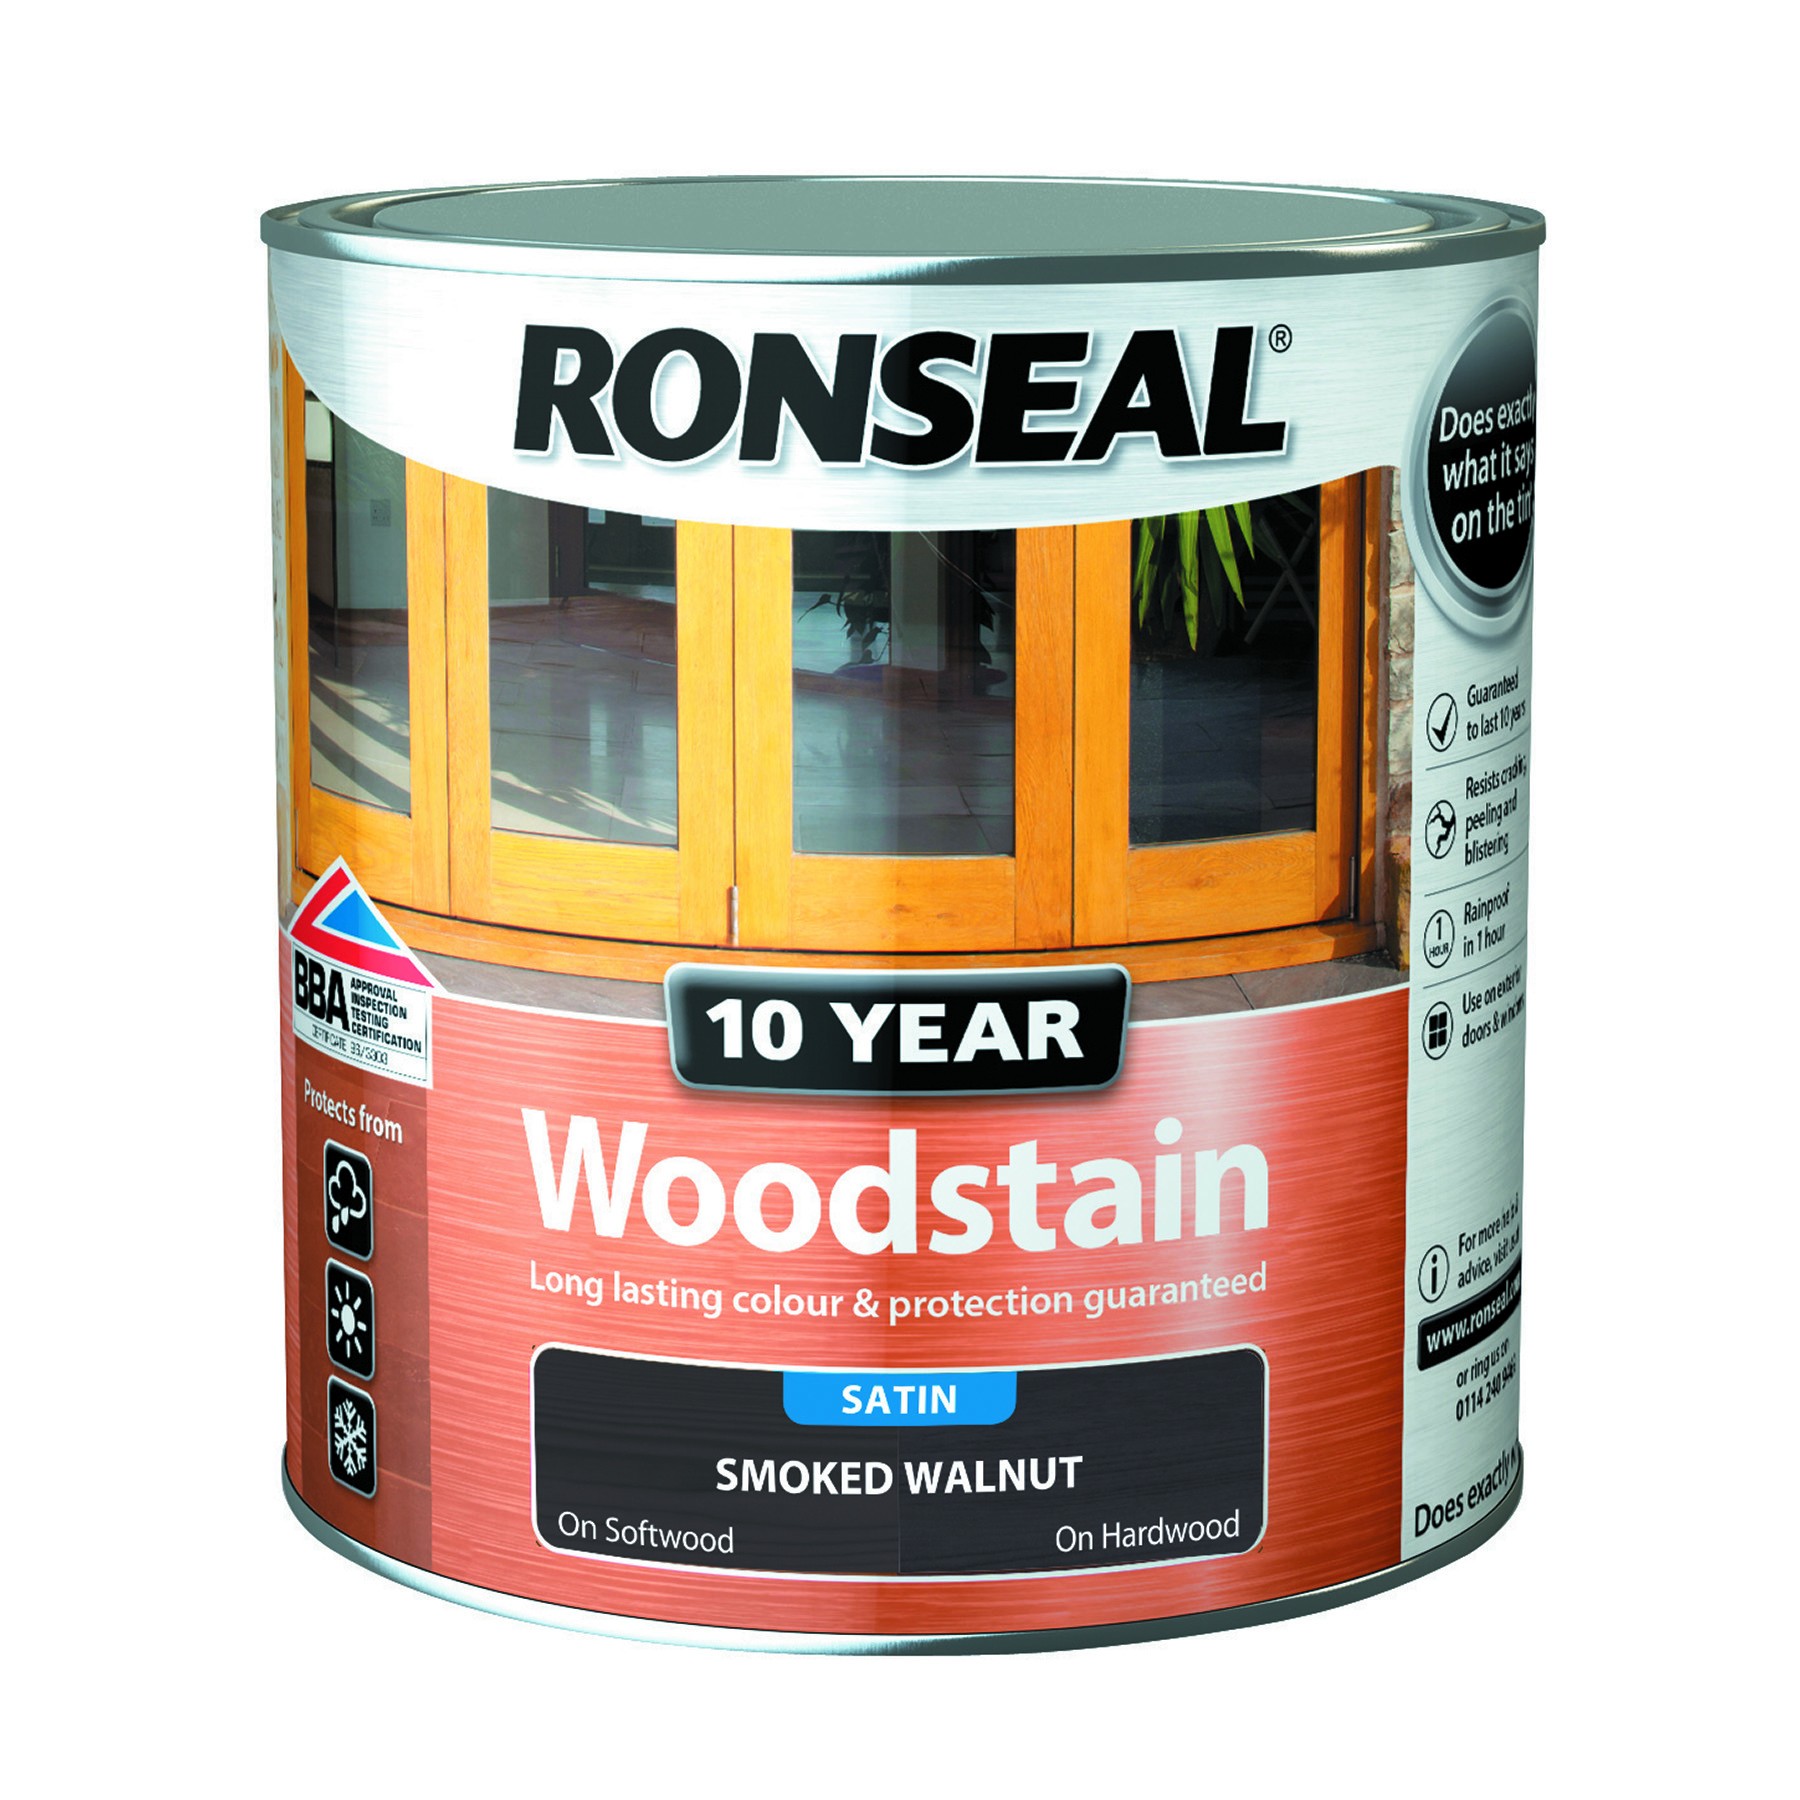 Ronseal 10 Year Woodstain 2.5L Satin Antique Pine [RON38687]